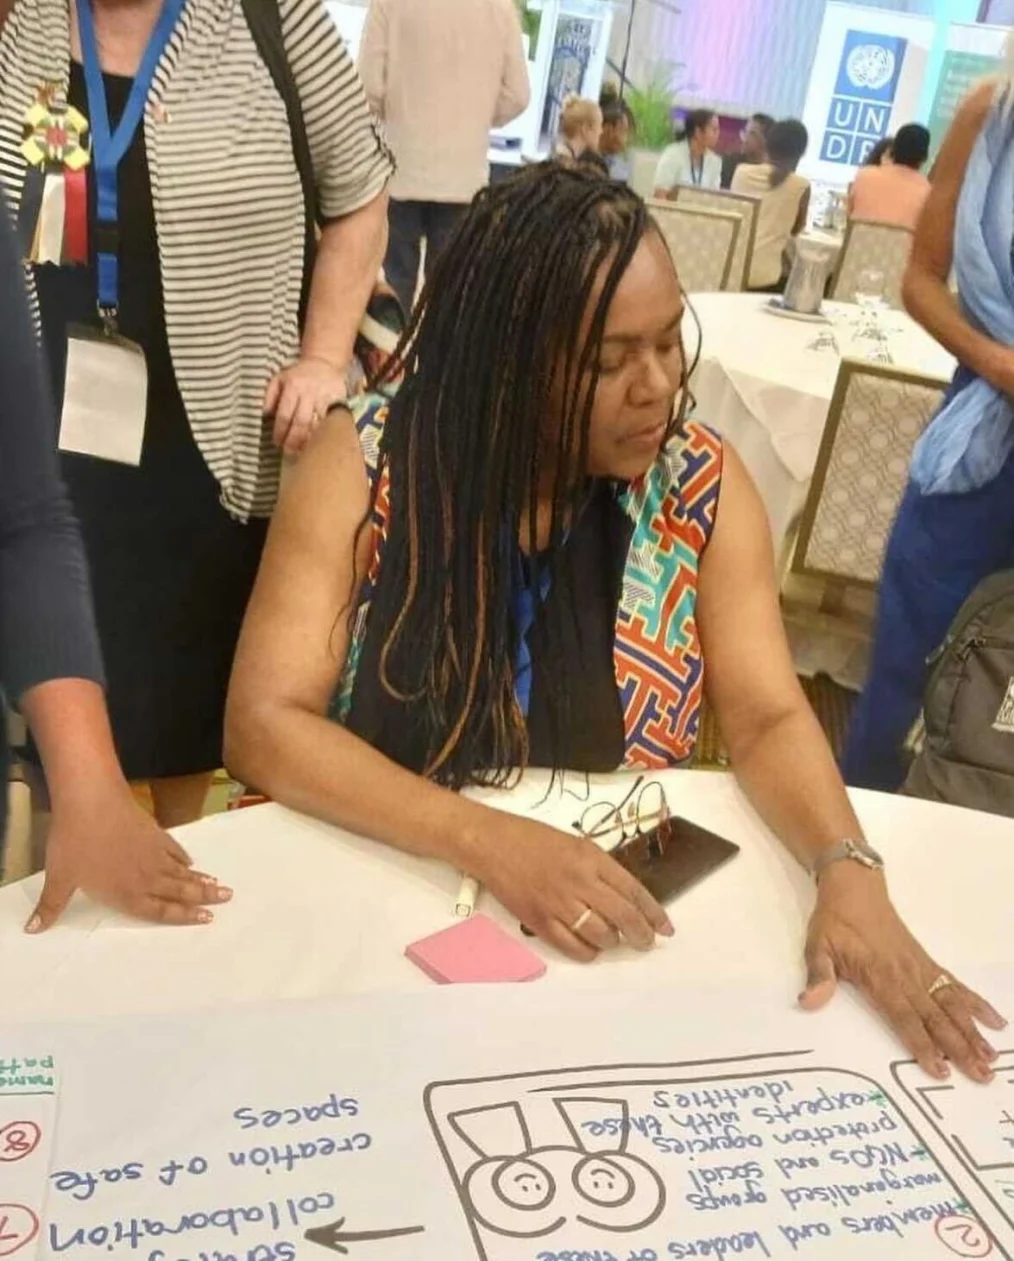 A Black woman with a medium skin tone sits at a table in a conference room. She has long black and brown box braids. She is wearing an orange, light blue, and dark blue Greek Key pattern vest. in the She states at a large piece of paper with a variety of drawings and text. On the table are a pair of glasses, an IPhone, pink post-it notes, and a marker. Behind the woman are a group of people standing around the table. They are a range of light to deep skin tones.